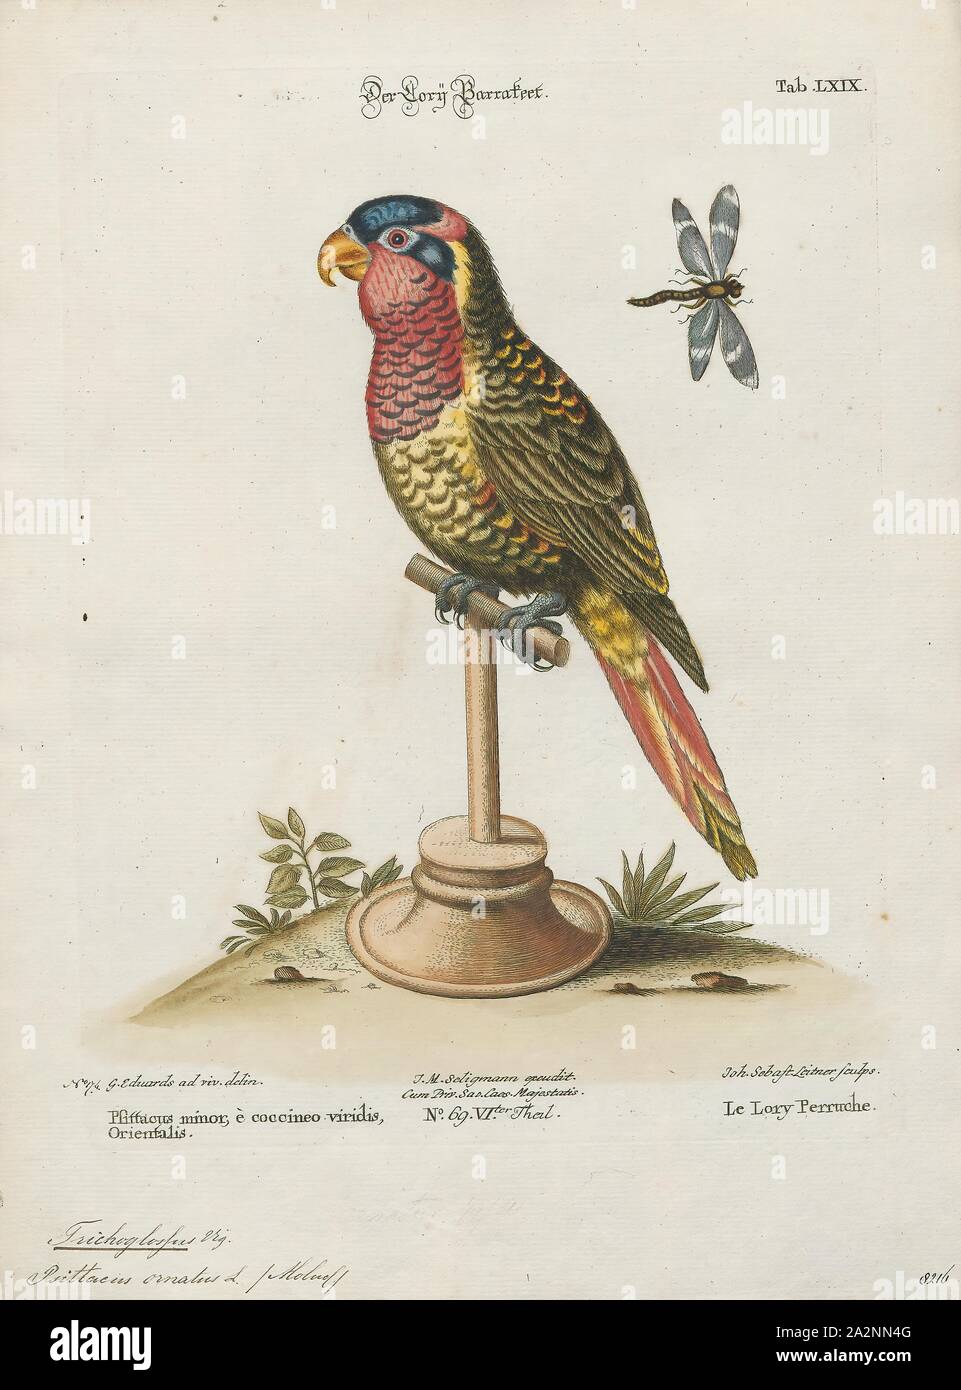 Trichoglossus ornatus, Print, The ornate lorikeet (Trichoglossus ornatus) is a species of parrot in the family Psittaculidae. It is endemic to the Sulawesi archipelago in Indonesia. It is found in forest, woodland, mangrove and plantations, and is locally common., 1700-1880 Stock Photo